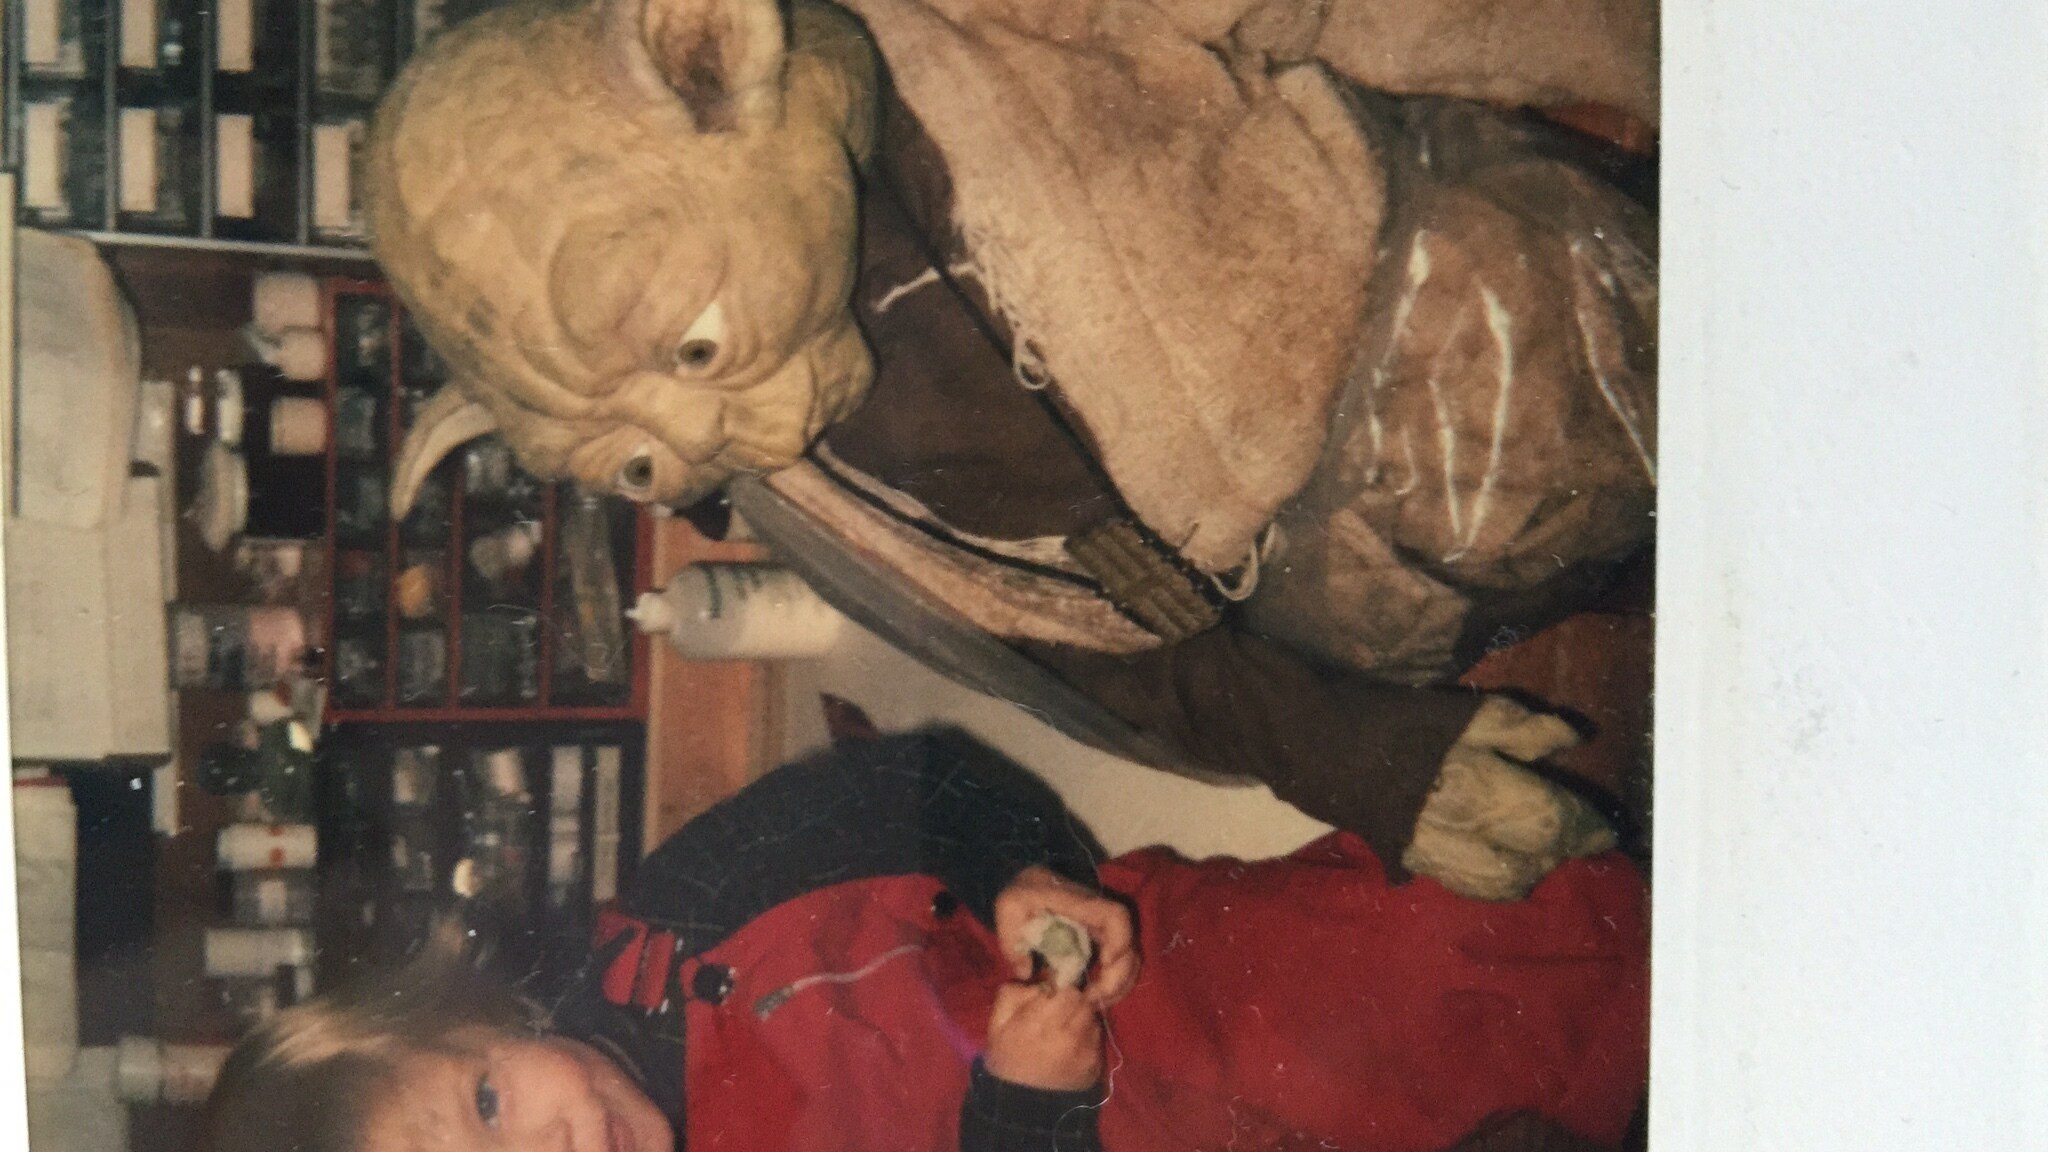 Judge me by my size: Nathan Hamill and Yoda (and a Yoda toy) in the creature shop